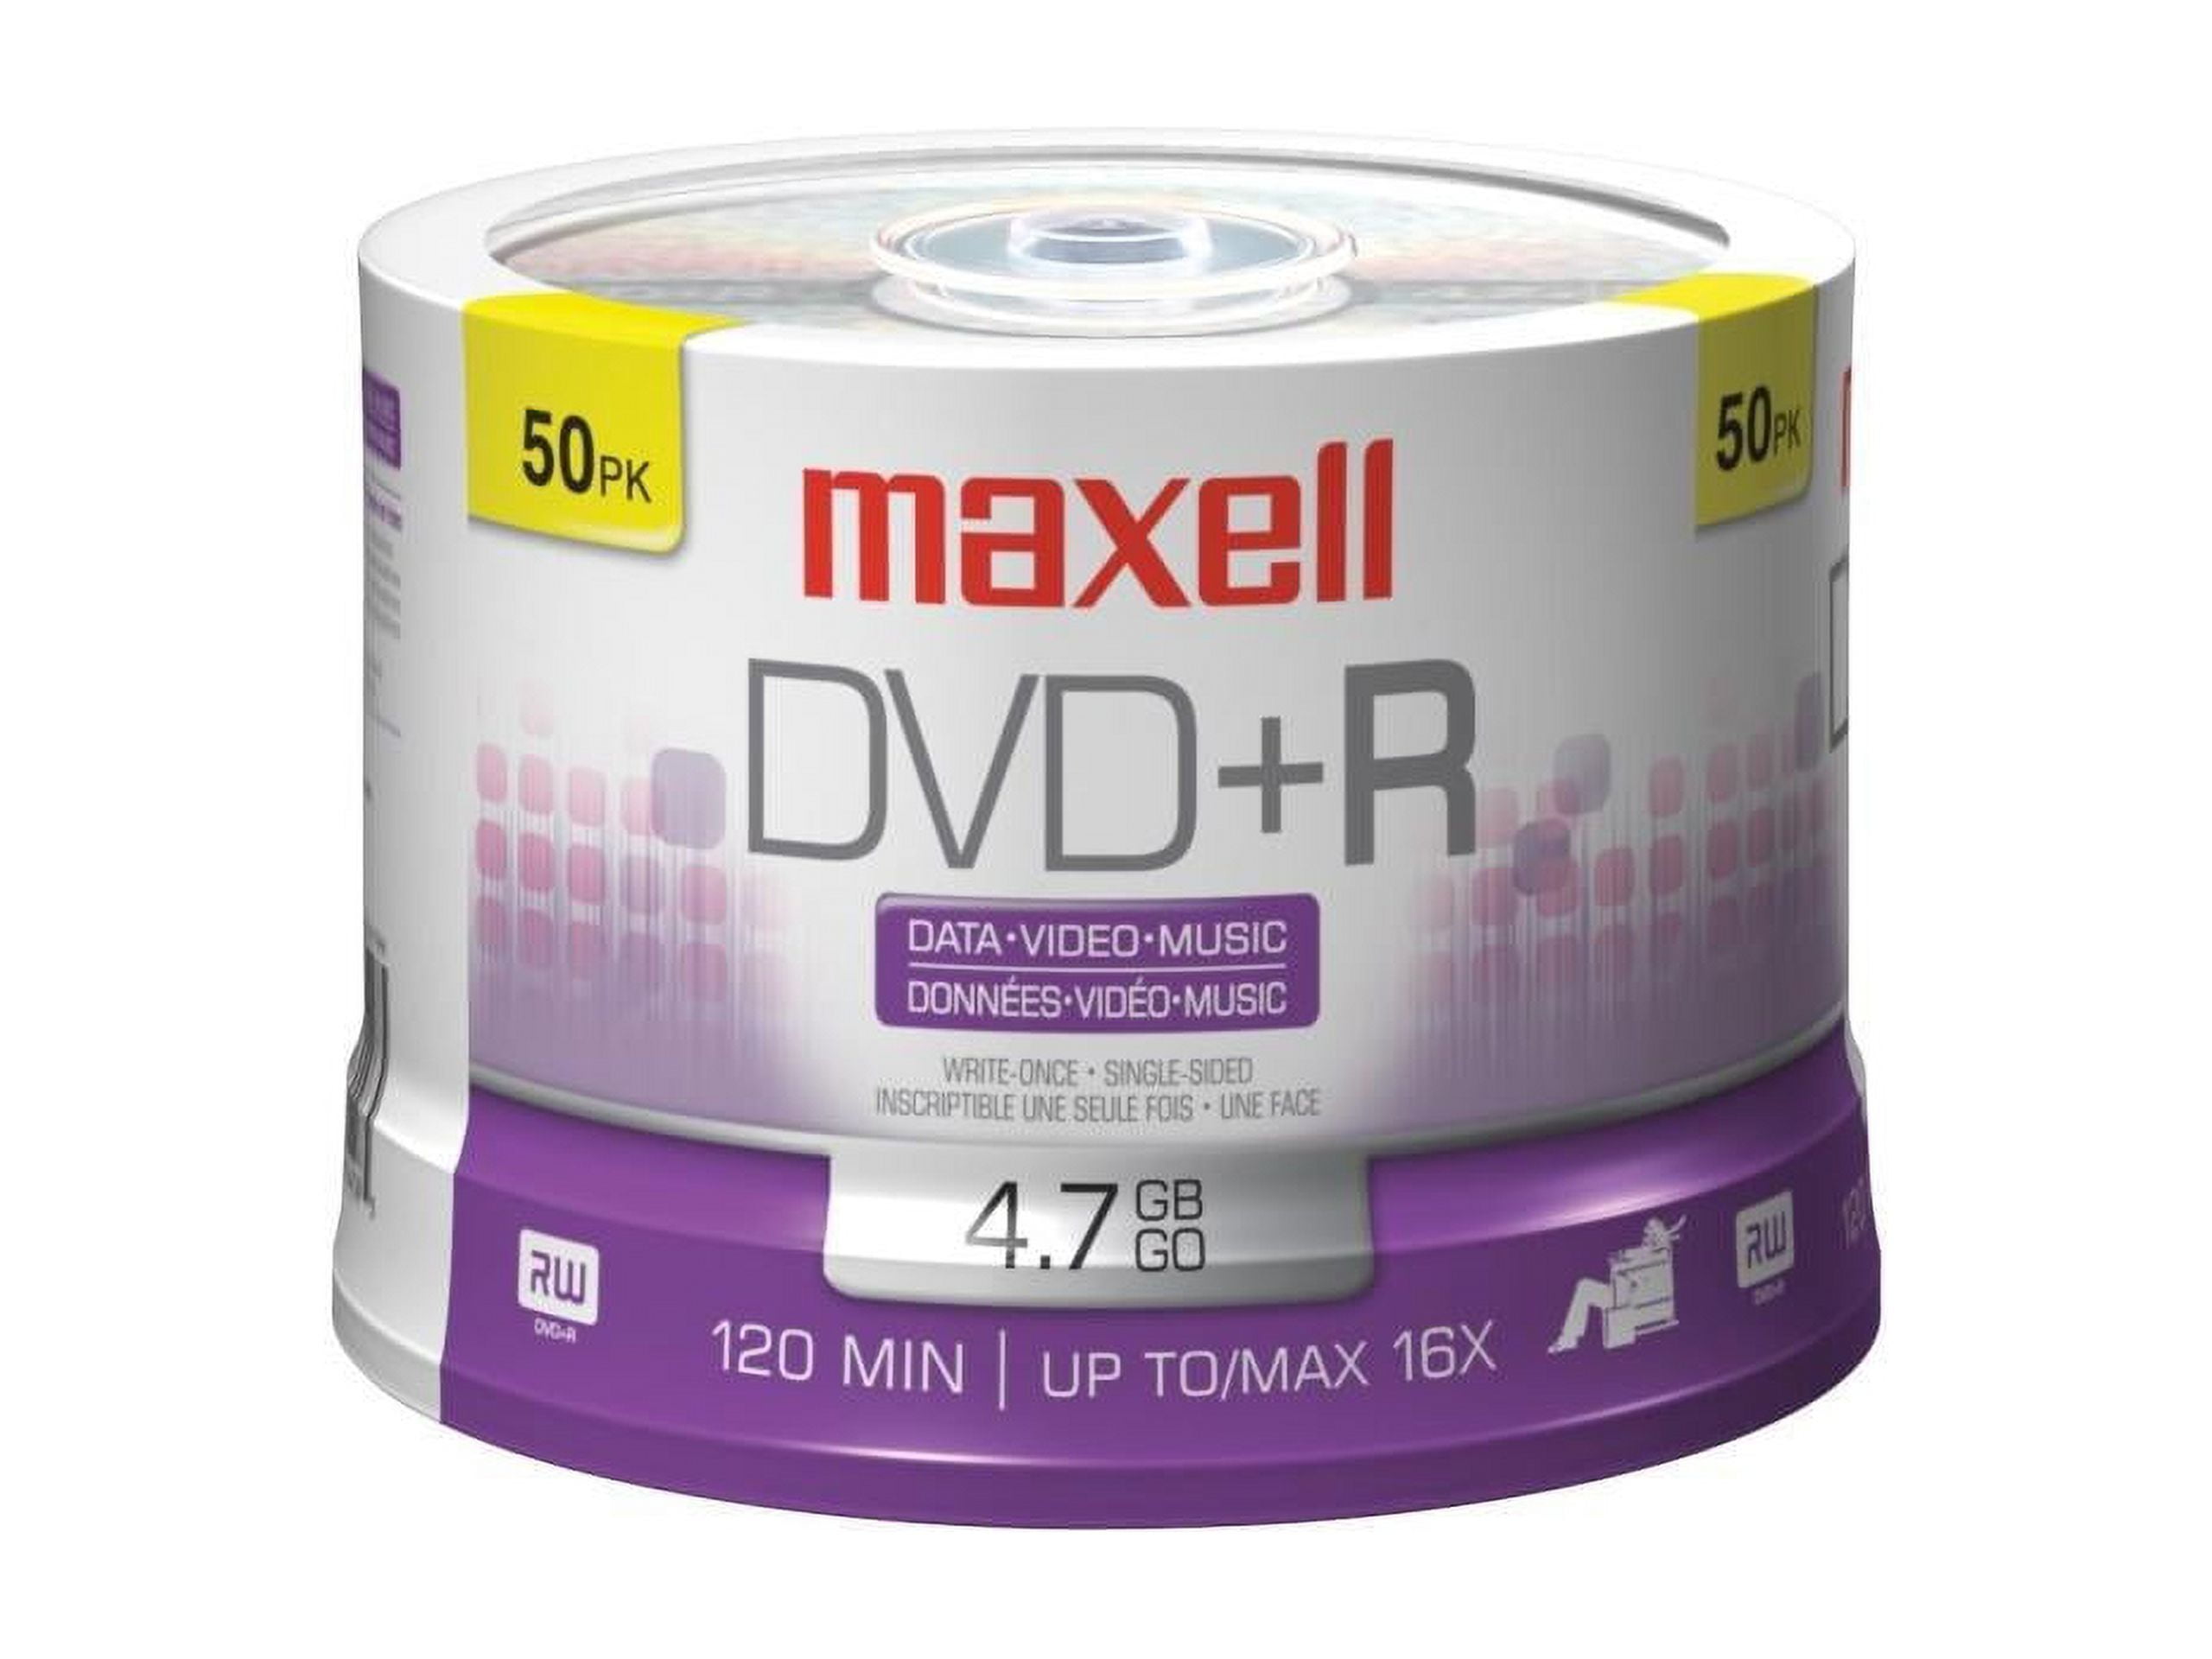 maxell 4.7GB DVD+R Packs Spindle Disc Model 639013